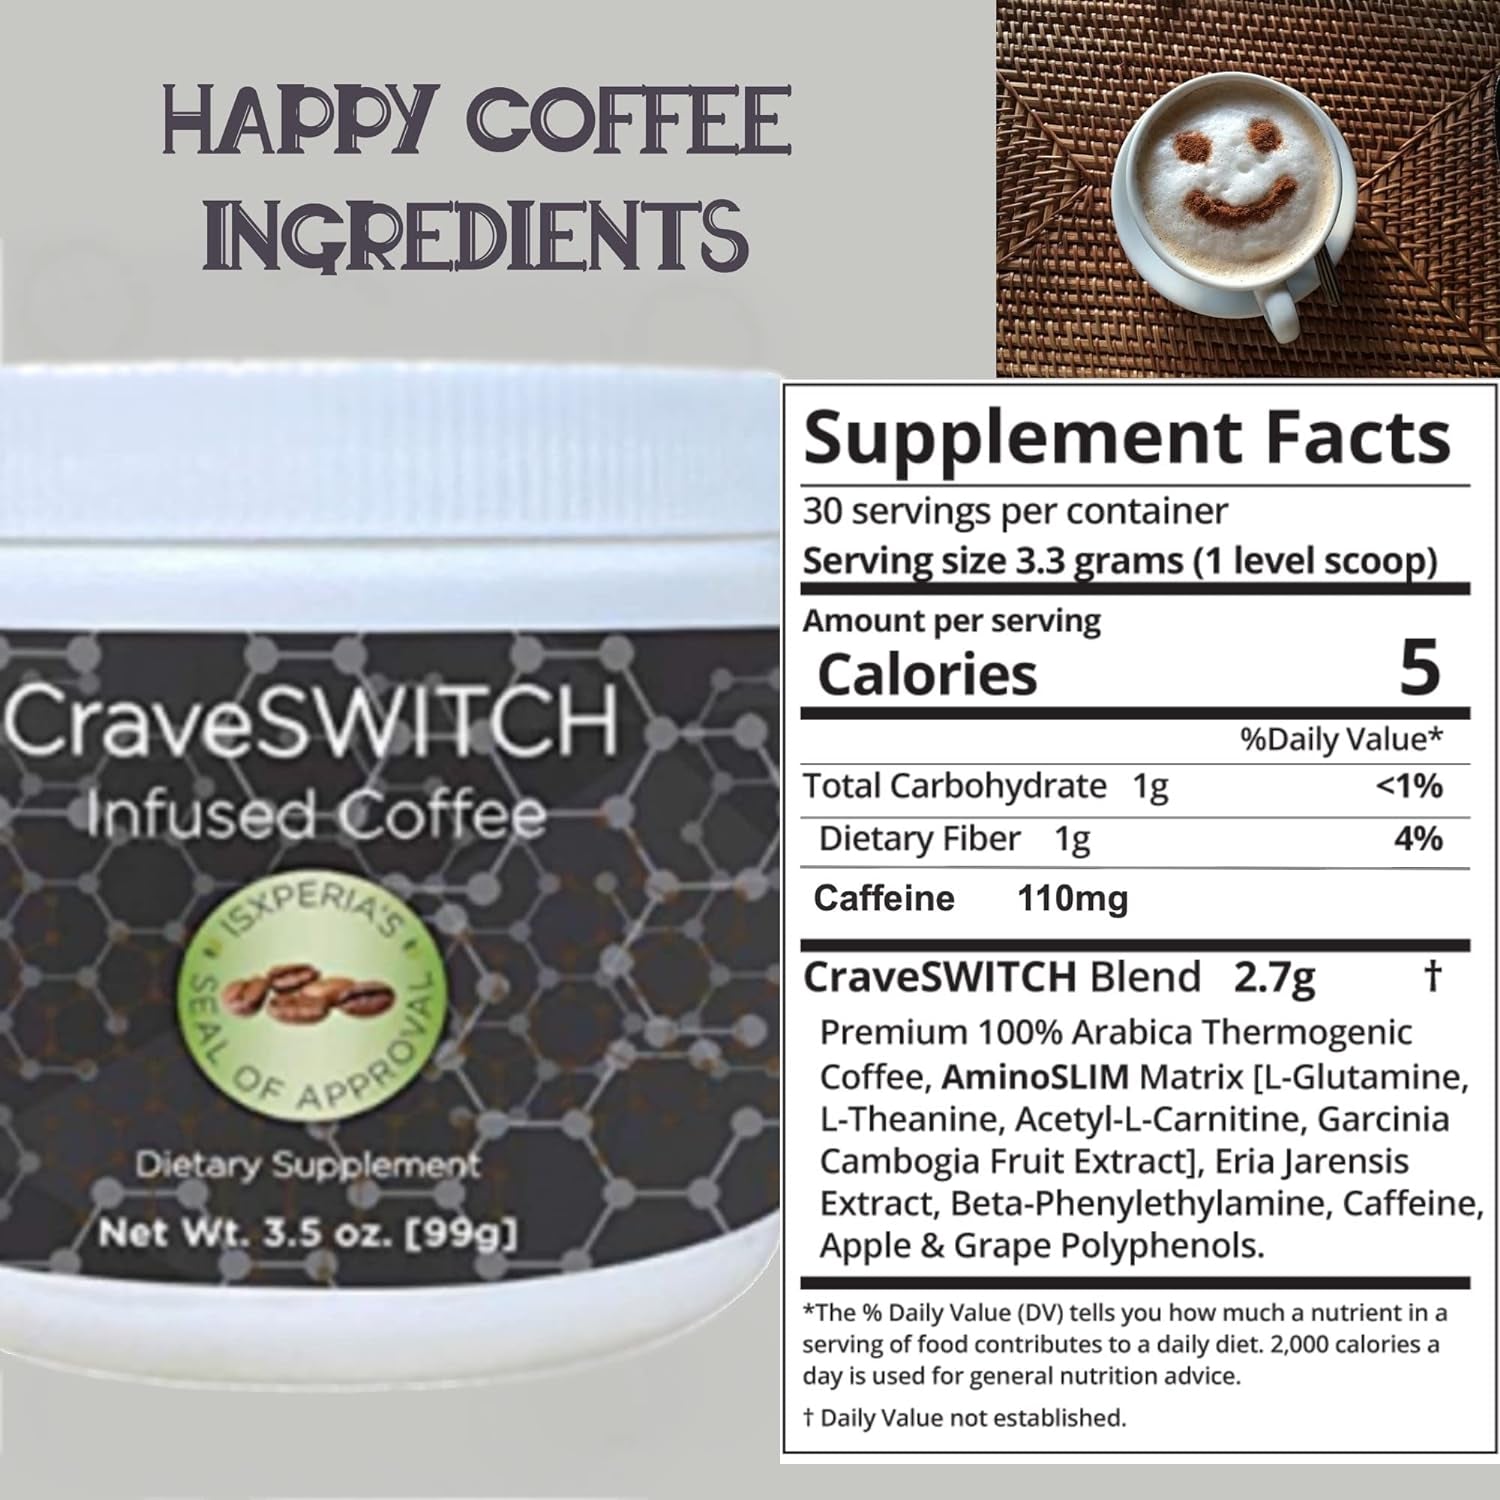 Isxperia Craveswitch Bold Coffee - Colombian Arabica Coffee with Antioxidants - Infused Nootropic Thermogenic Smart Coffee - Naturally Support Energy Levels - 3.5 Oz Powder Mix, 30 Servings